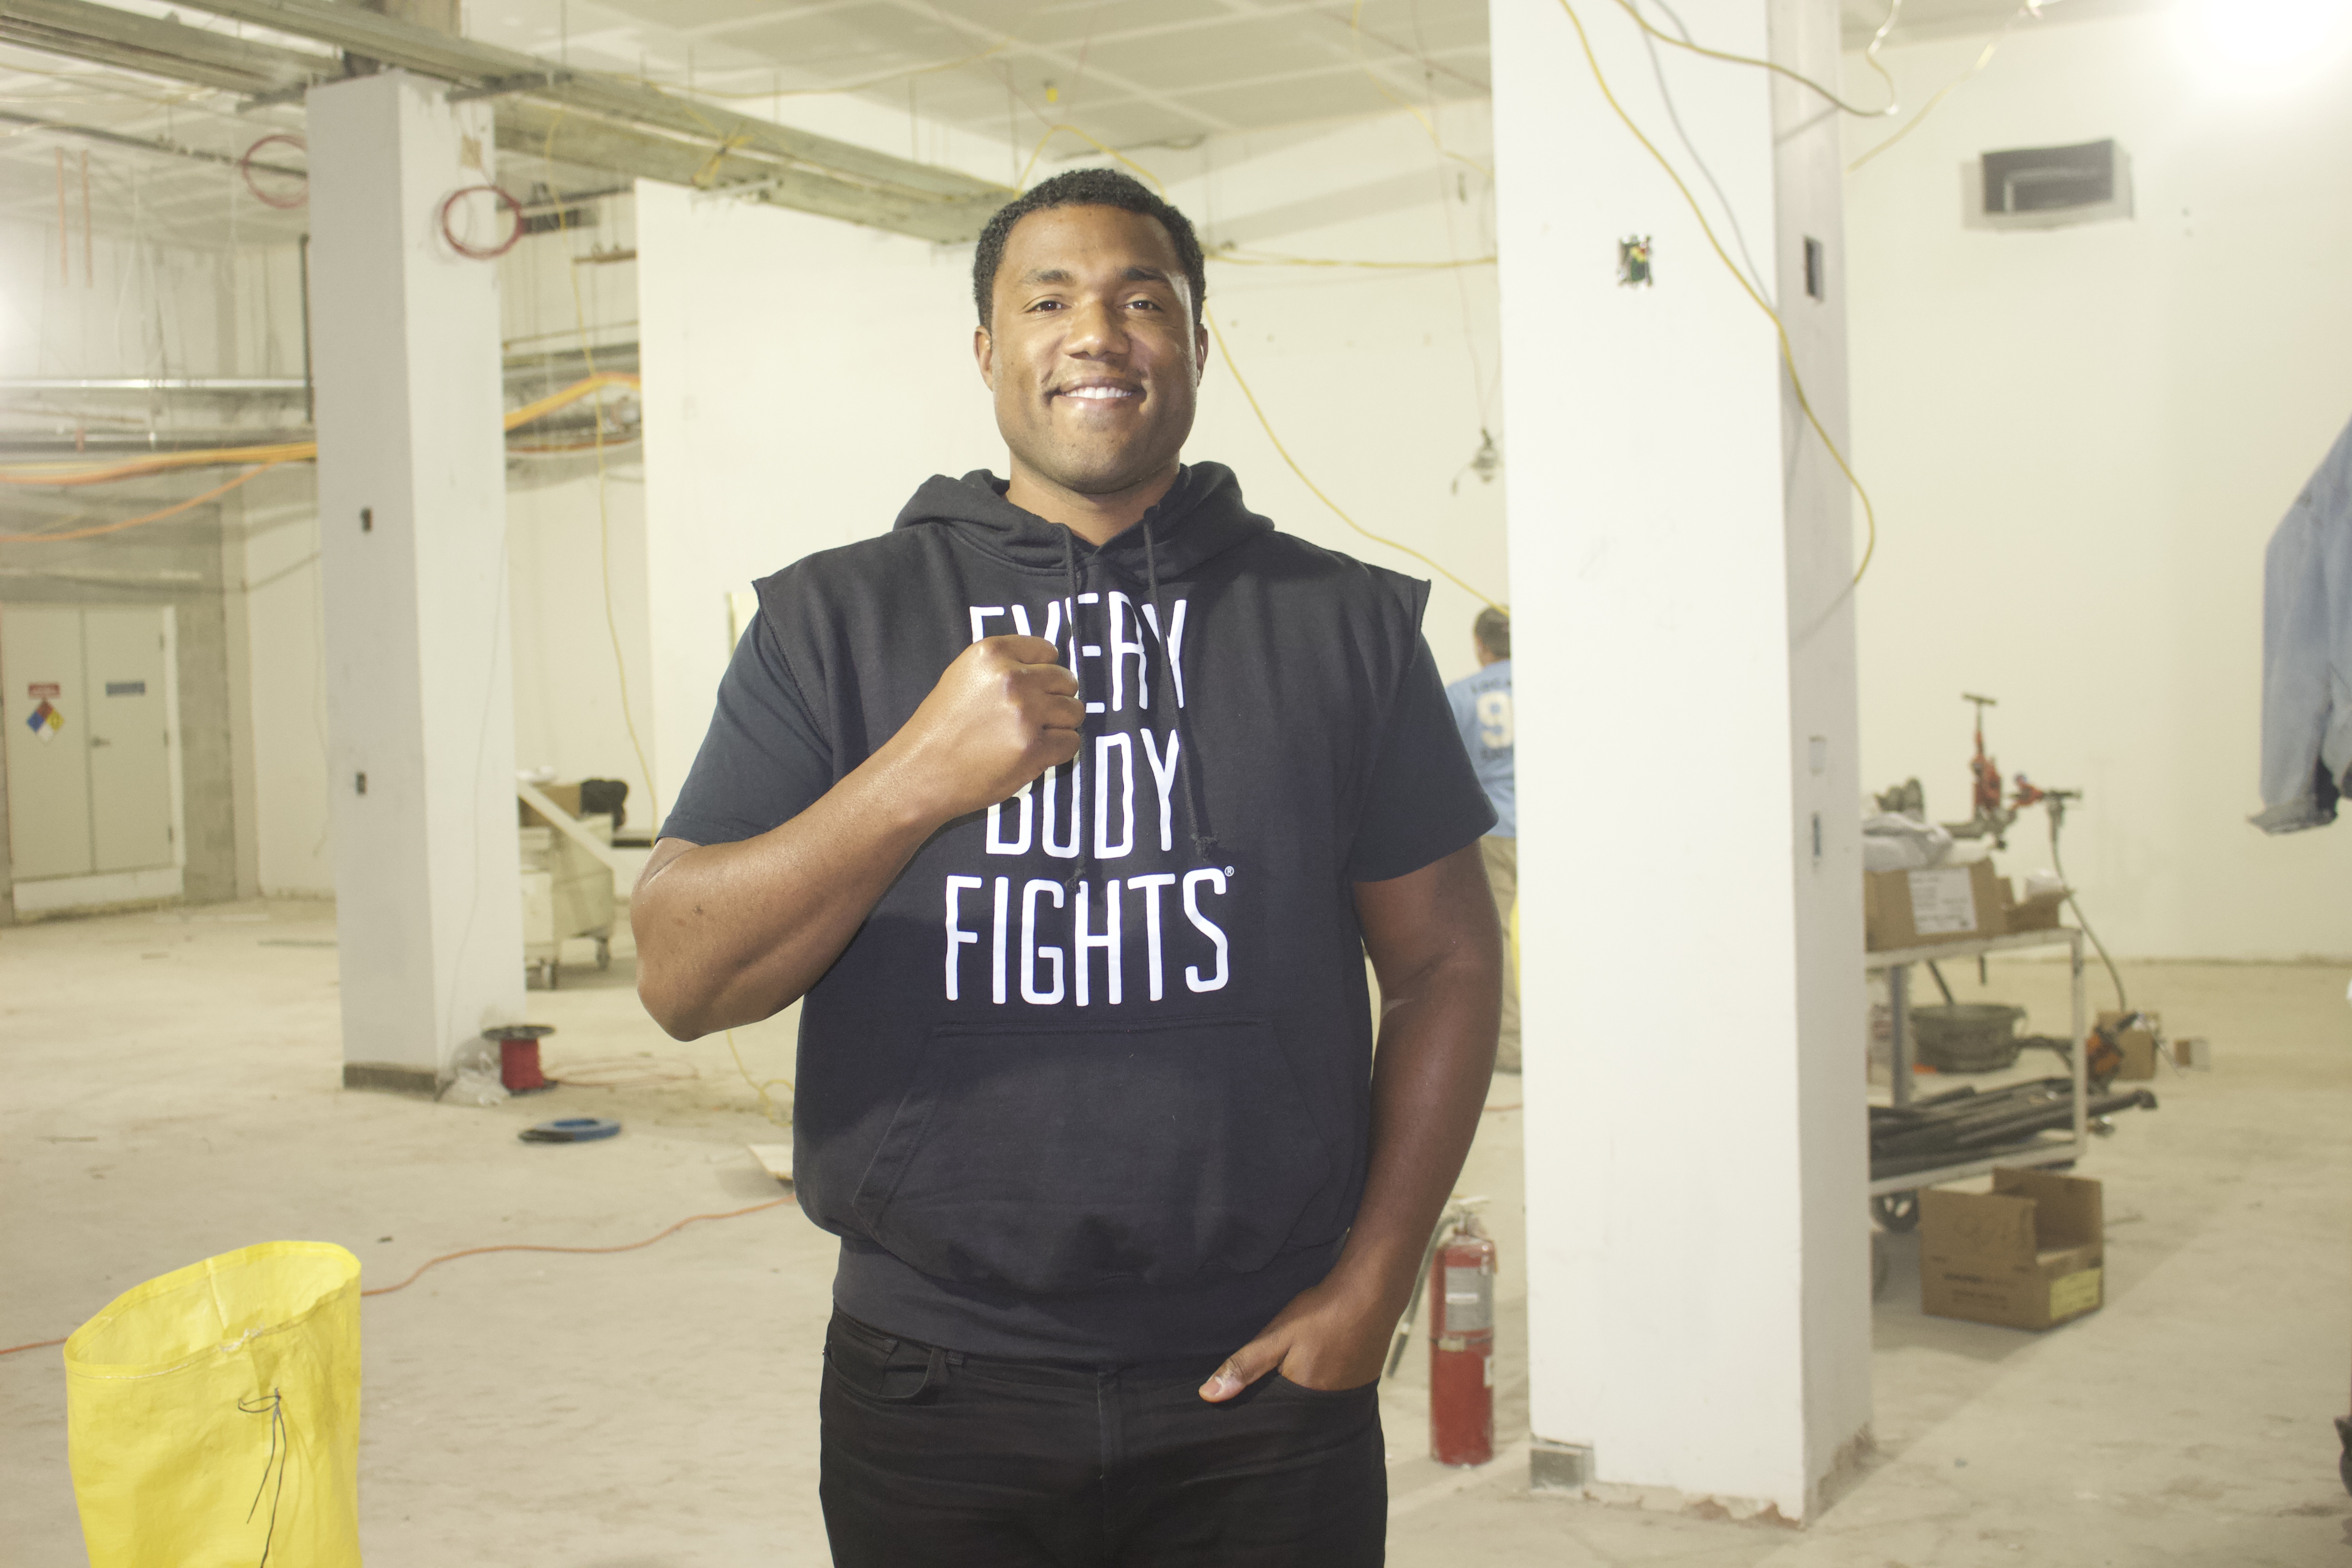 George Foreman III, the boxer, trainer, and entrepreneur at the newest EverybodyFights gym in Philadelphia, currently being built. Photo: AL DÍA News / Jensen Toussaint 